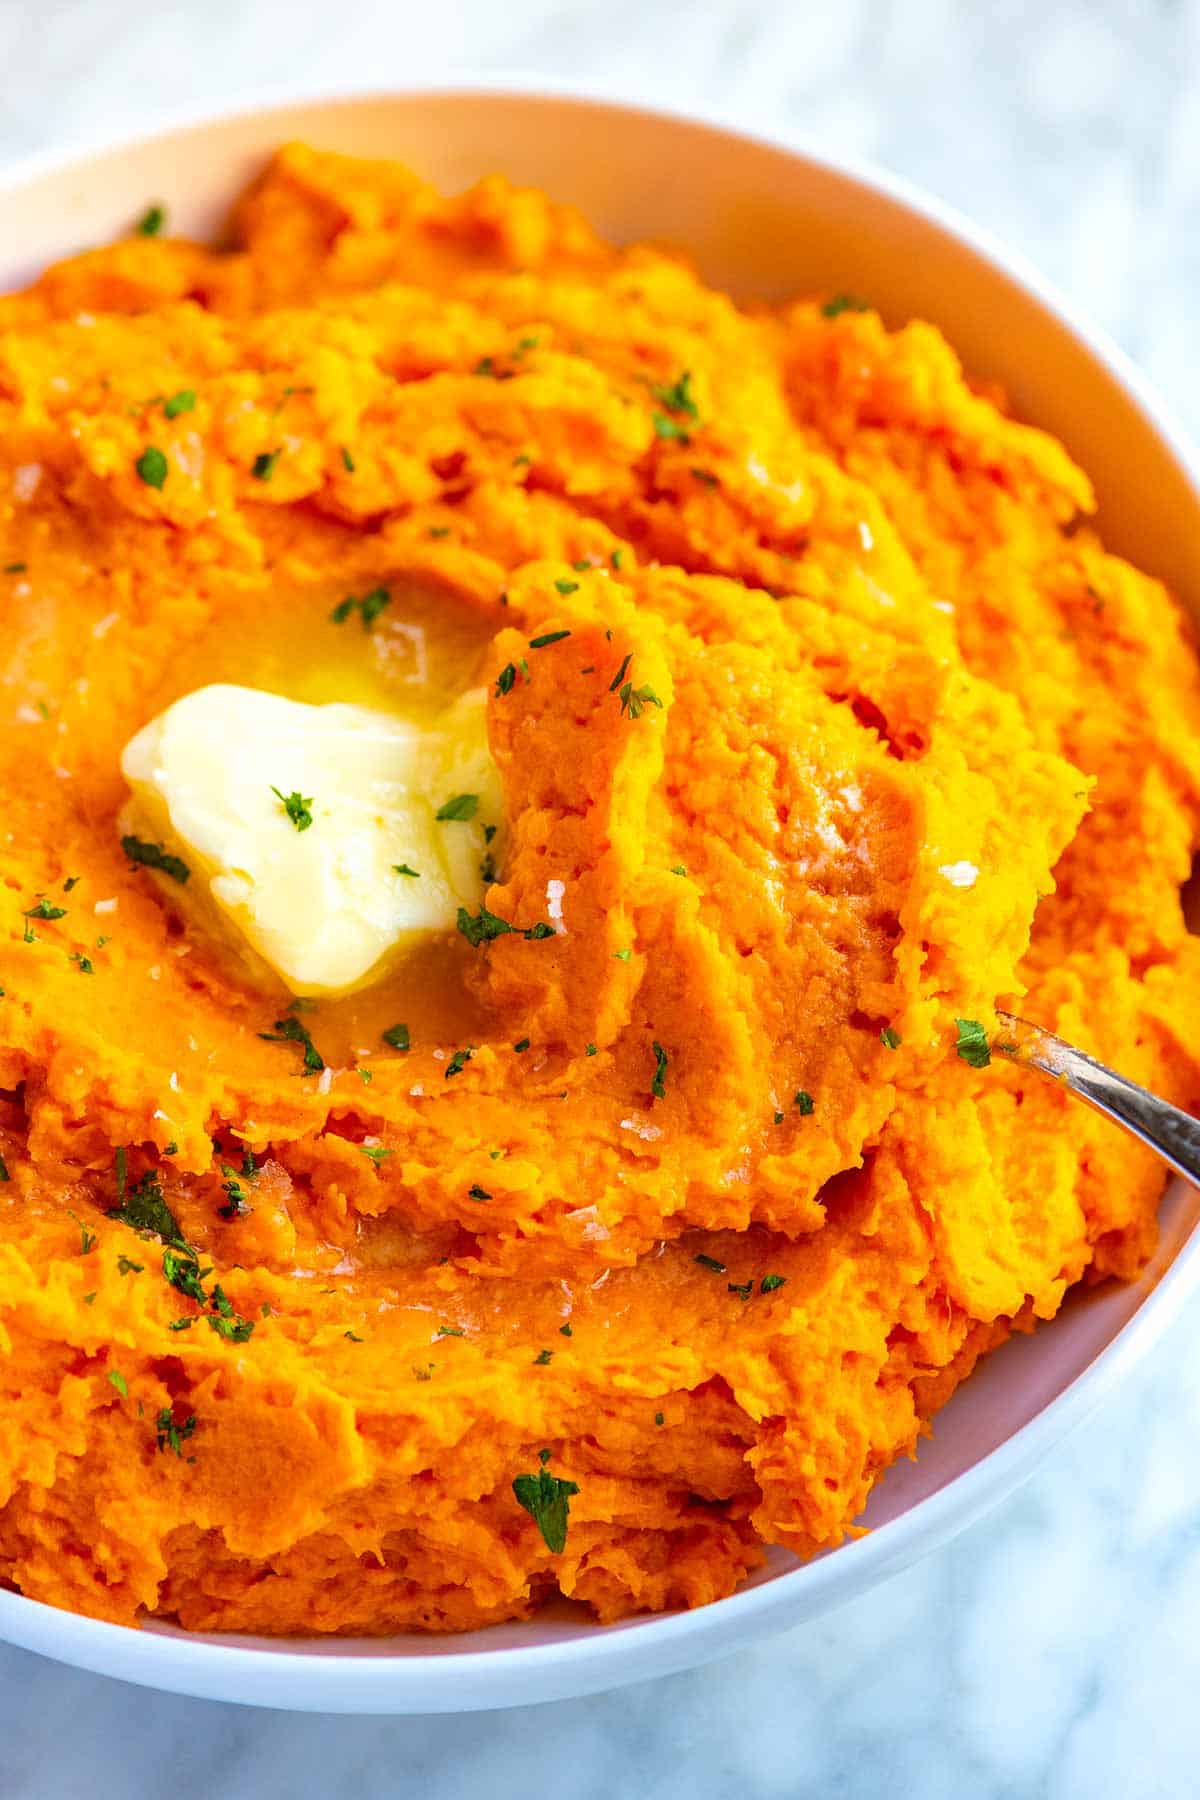 Mashed sweet potatoes with butter and cinnamon